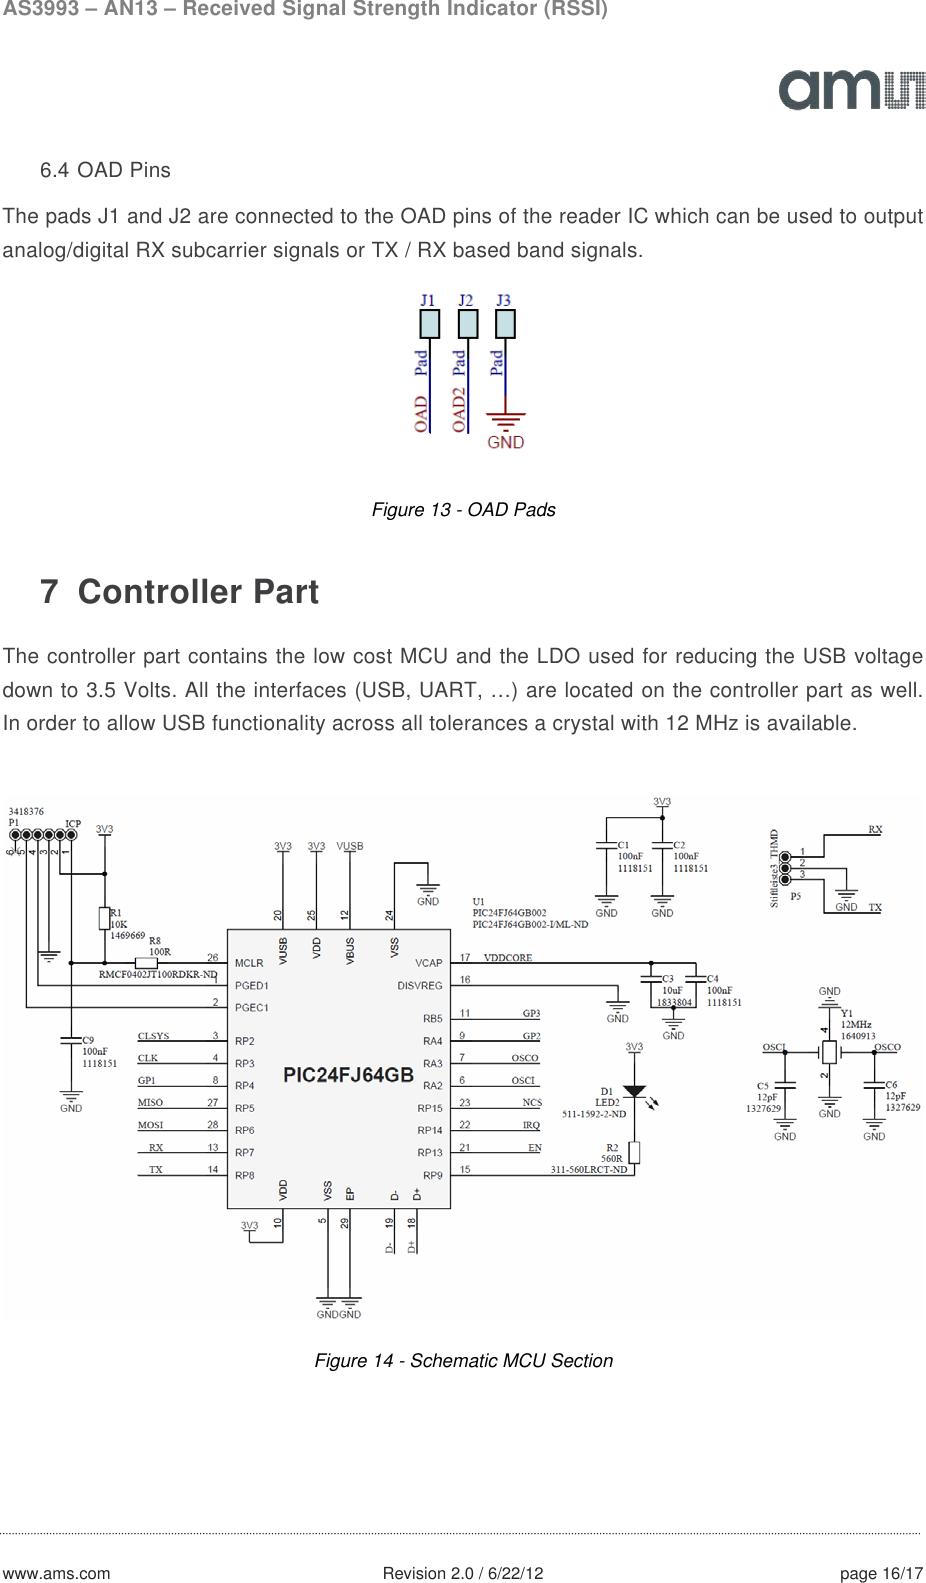 AS3993 – AN13 – Received Signal Strength Indicator (RSSI)  www.ams.com              Revision 2.0 / 6/22/12 page 16/17  6.4 OAD Pins The pads J1 and J2 are connected to the OAD pins of the reader IC which can be used to output analog/digital RX subcarrier signals or TX / RX based band signals.  Figure 13 - OAD Pads  7  Controller Part The controller part contains the low cost MCU and the LDO used for reducing the USB voltage down to 3.5 Volts. All the interfaces (USB, UART, …) are located on the controller part as well. In order to allow USB functionality across all tolerances a crystal with 12 MHz is available.   Figure 14 - Schematic MCU Section    